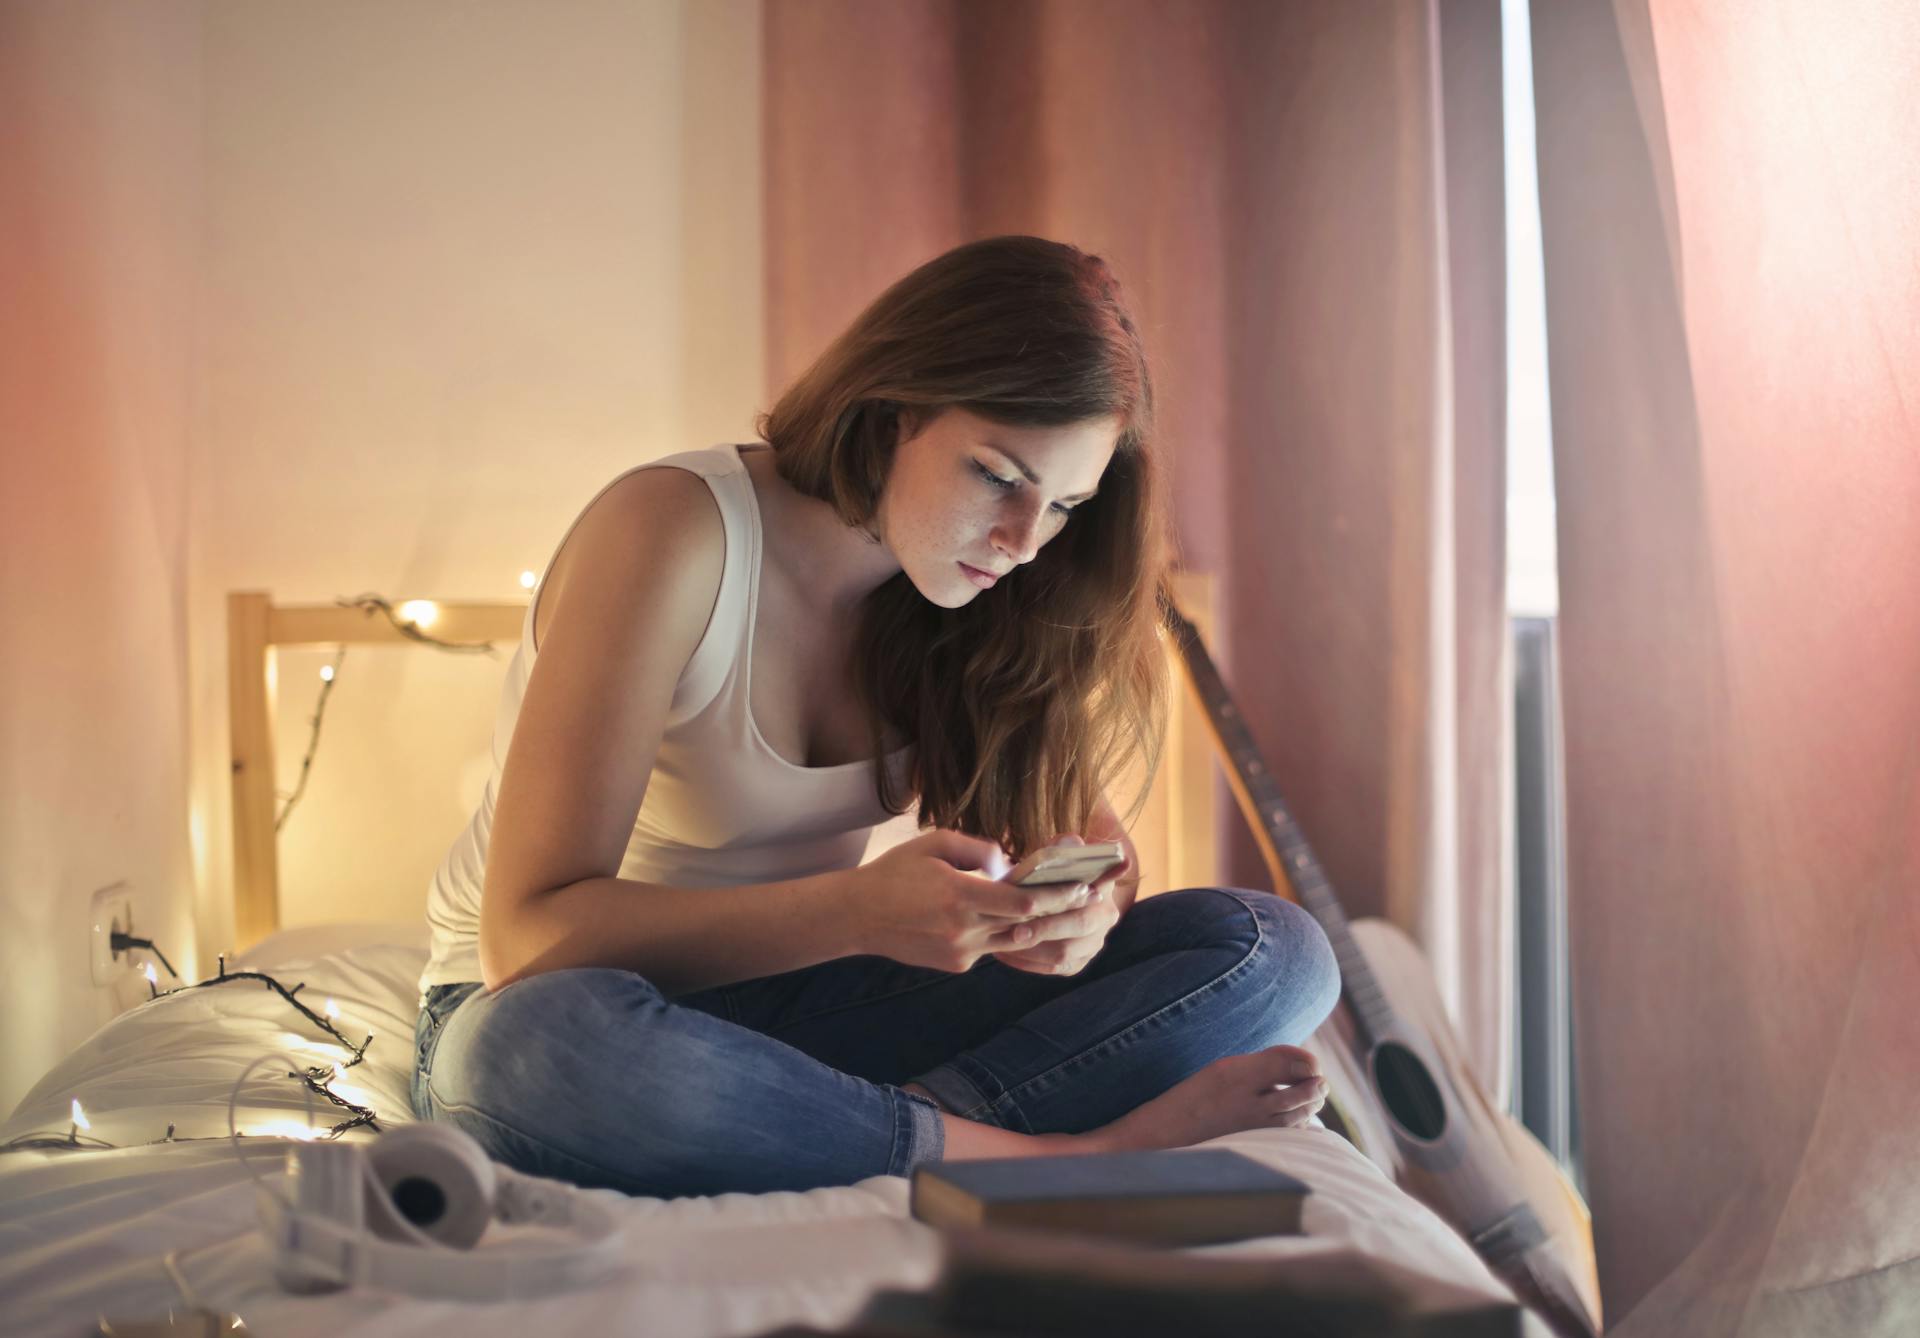 A woman using her phone while sitting on her bed | Source: Pexels